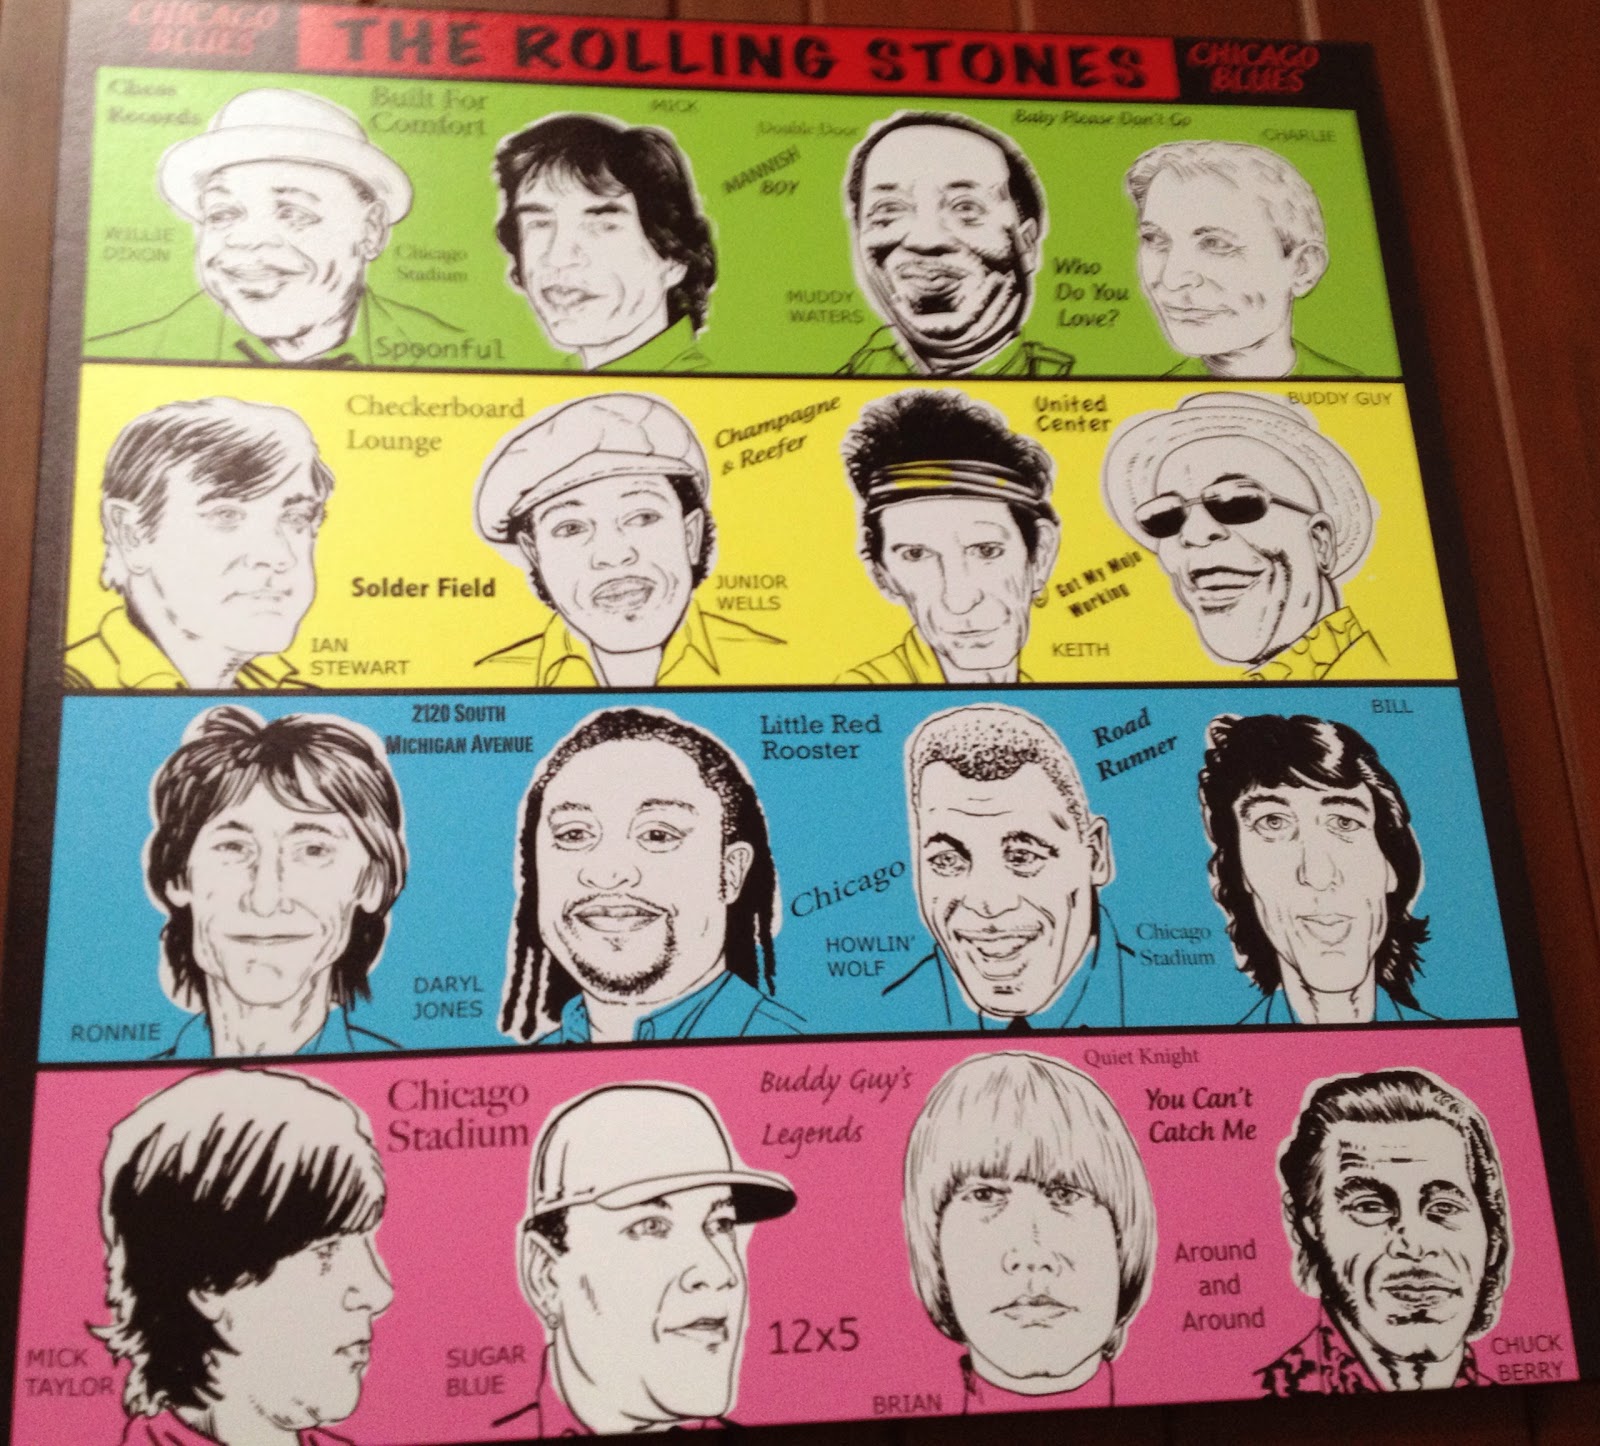 The Rolling Stones Muddy Waters at Chess Records 2120 S Michigan Avenue